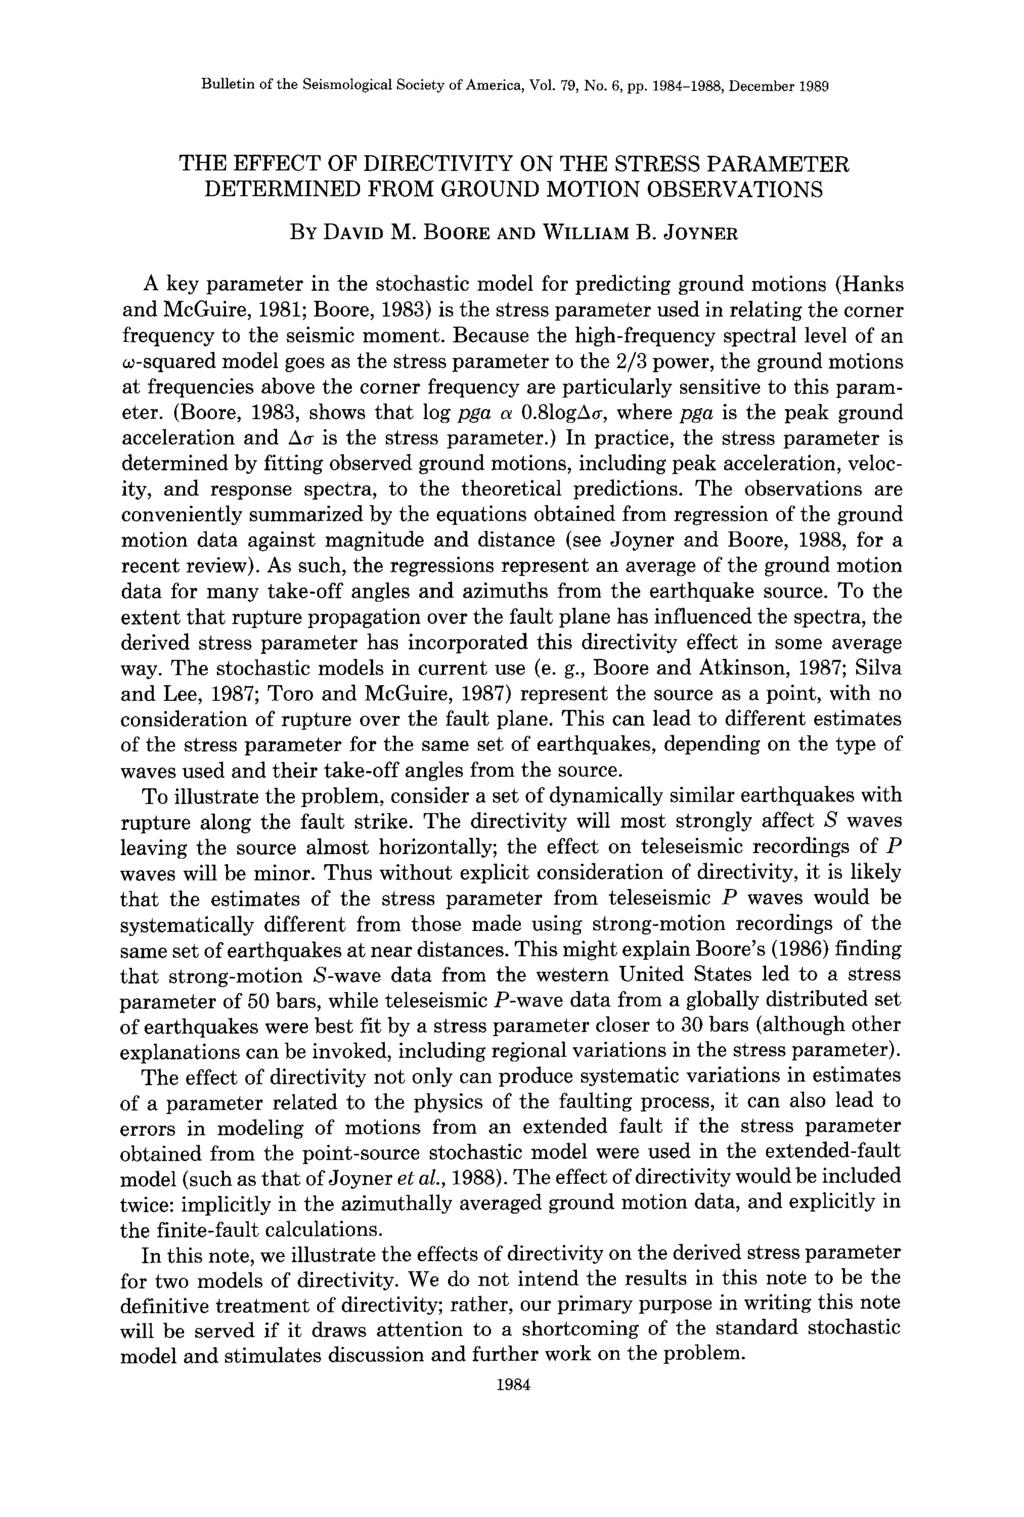 Bulletin of the Seismological Society of America, Vol. 79, No. 6, pp. 1984-1988, December 1989 THE EFFECT OF DIRECTIVITY ON THE STRESS PARAMETER DETERMINED FROM GROUND MOTION OBSERVATIONS BY DAVID M.